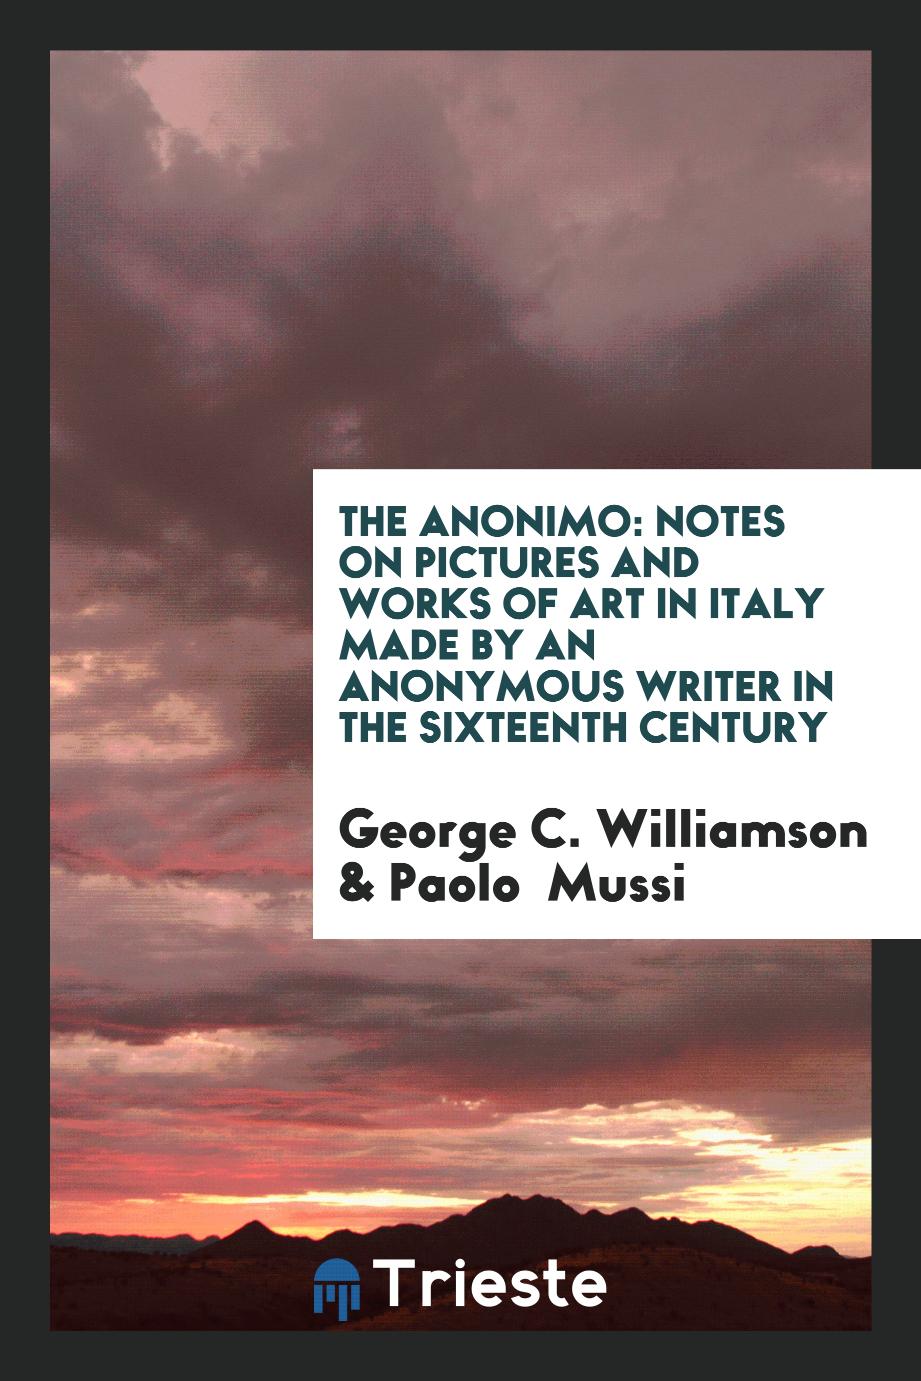 The Anonimo: Notes on Pictures and Works of Art in Italy Made by an Anonymous Writer in the Sixteenth Century